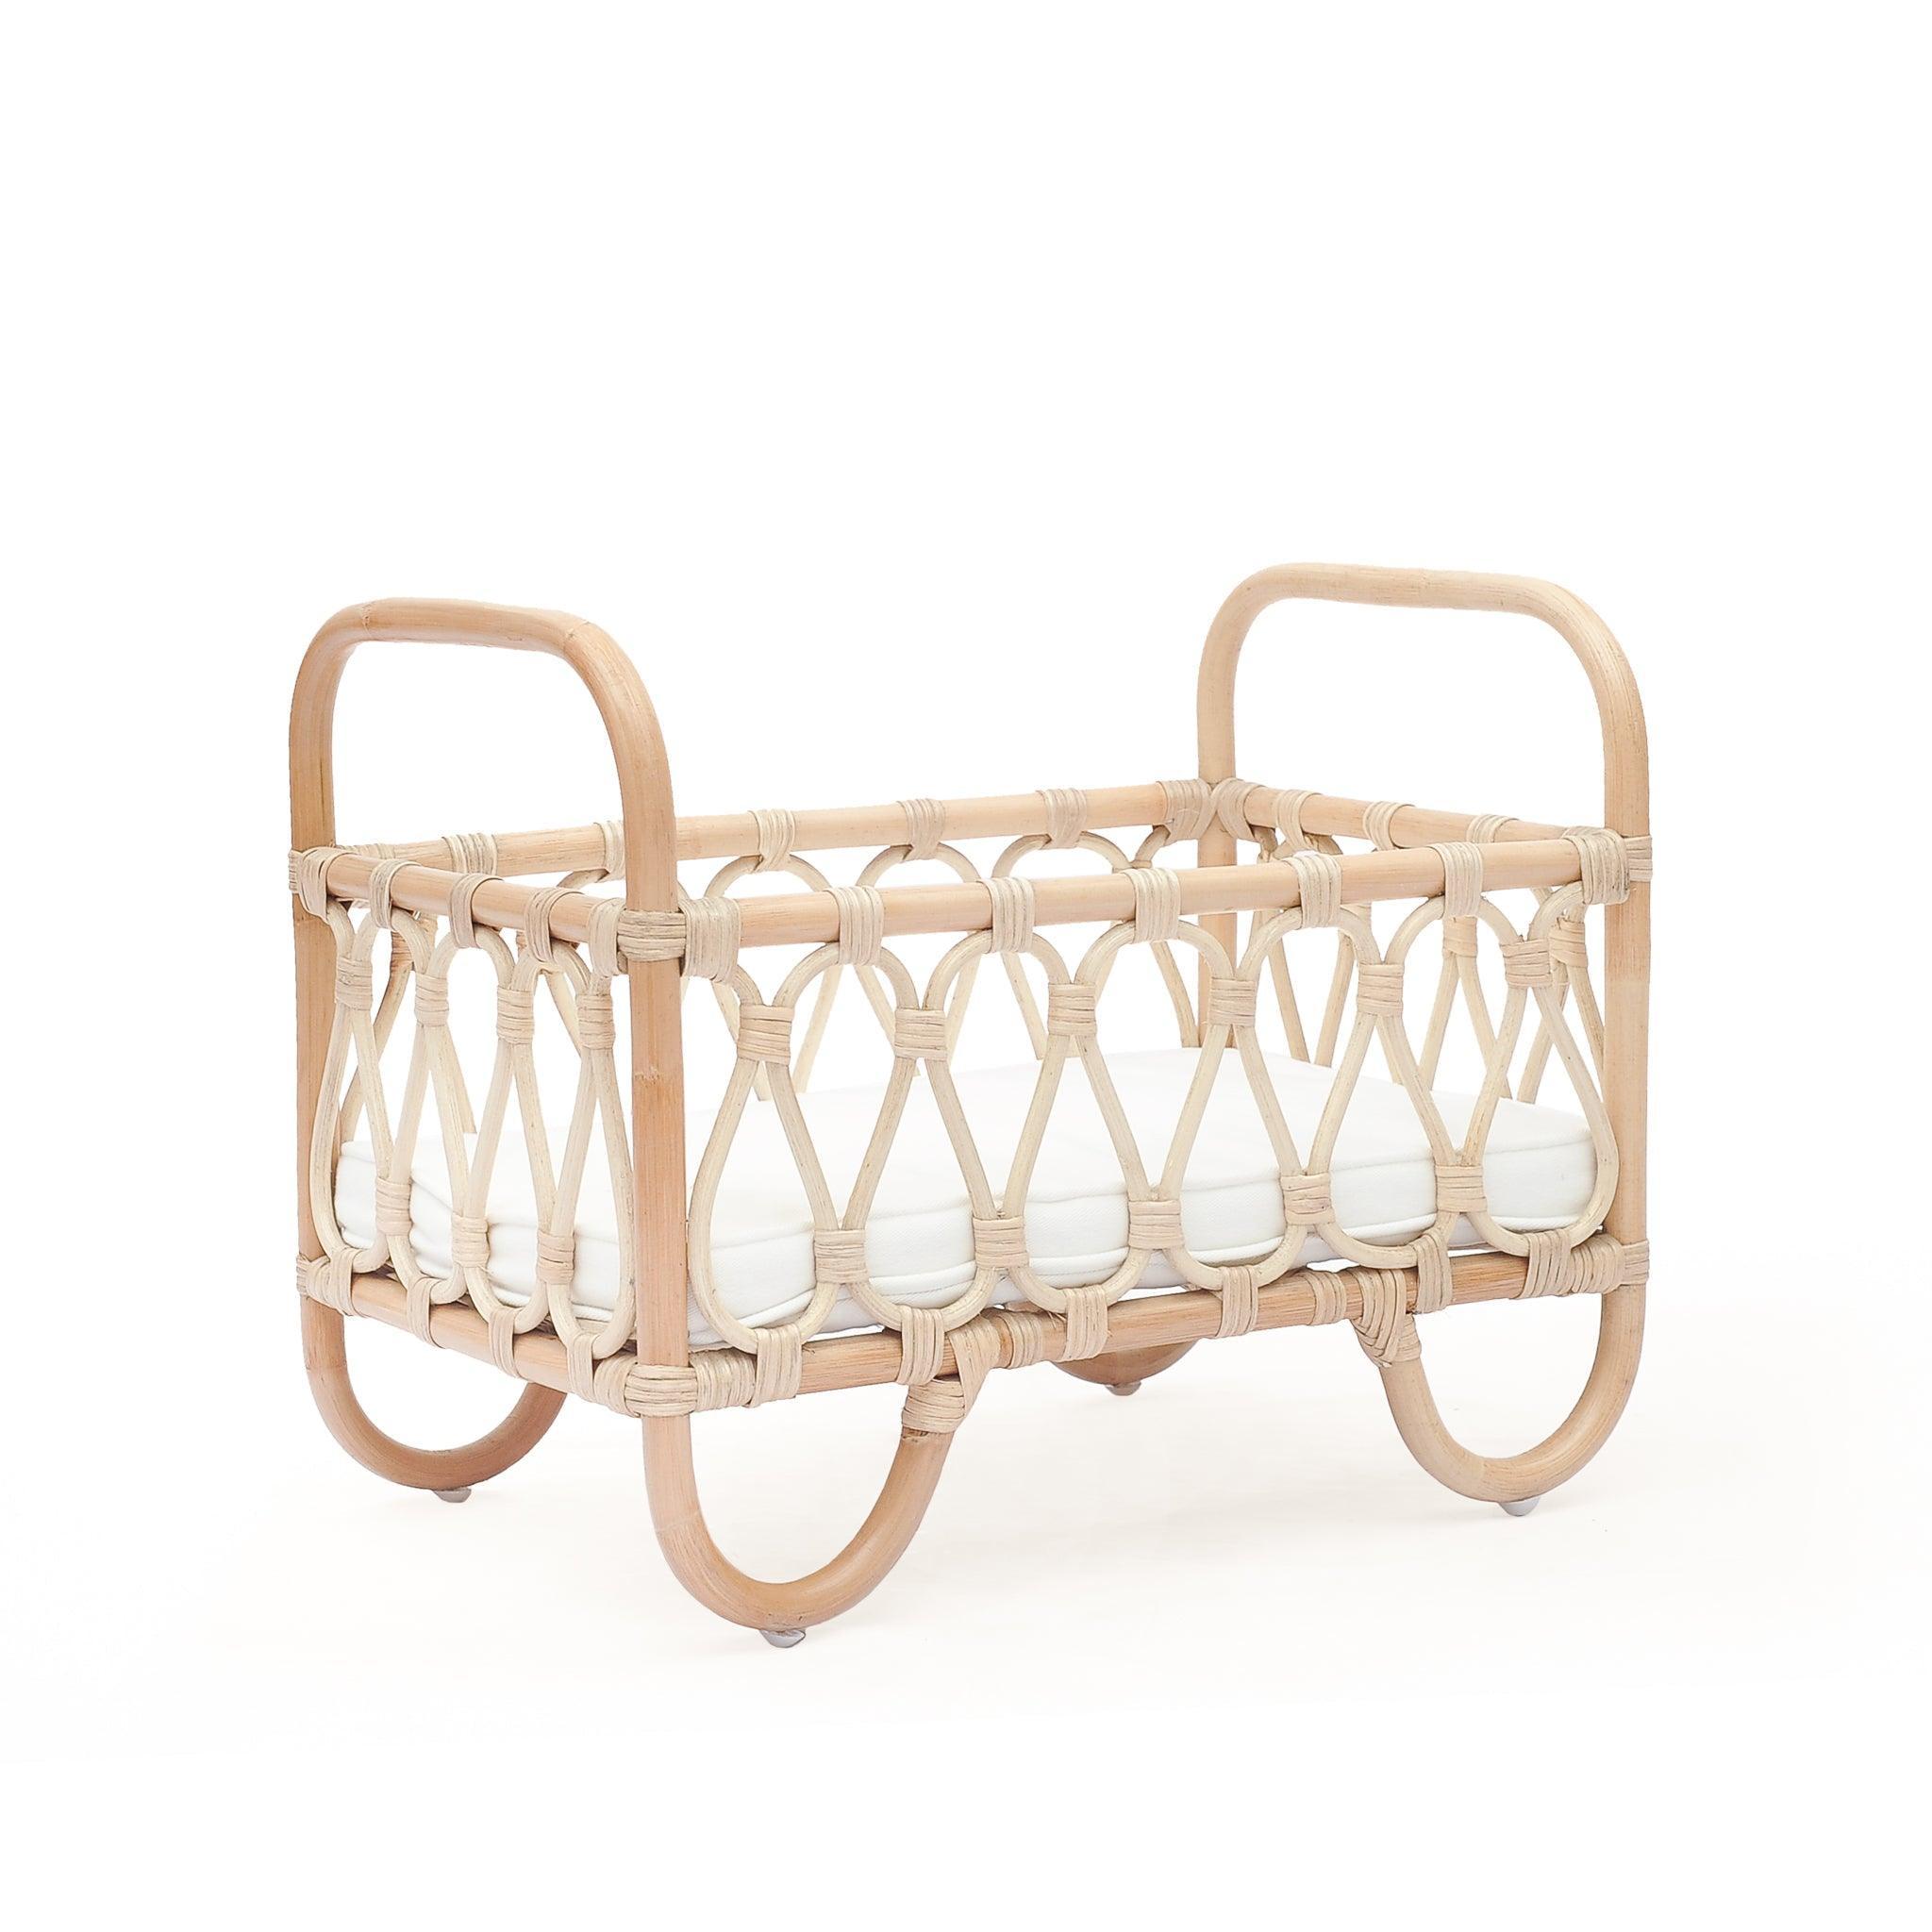 Ellie Petite Doll Crib - Why and Whale